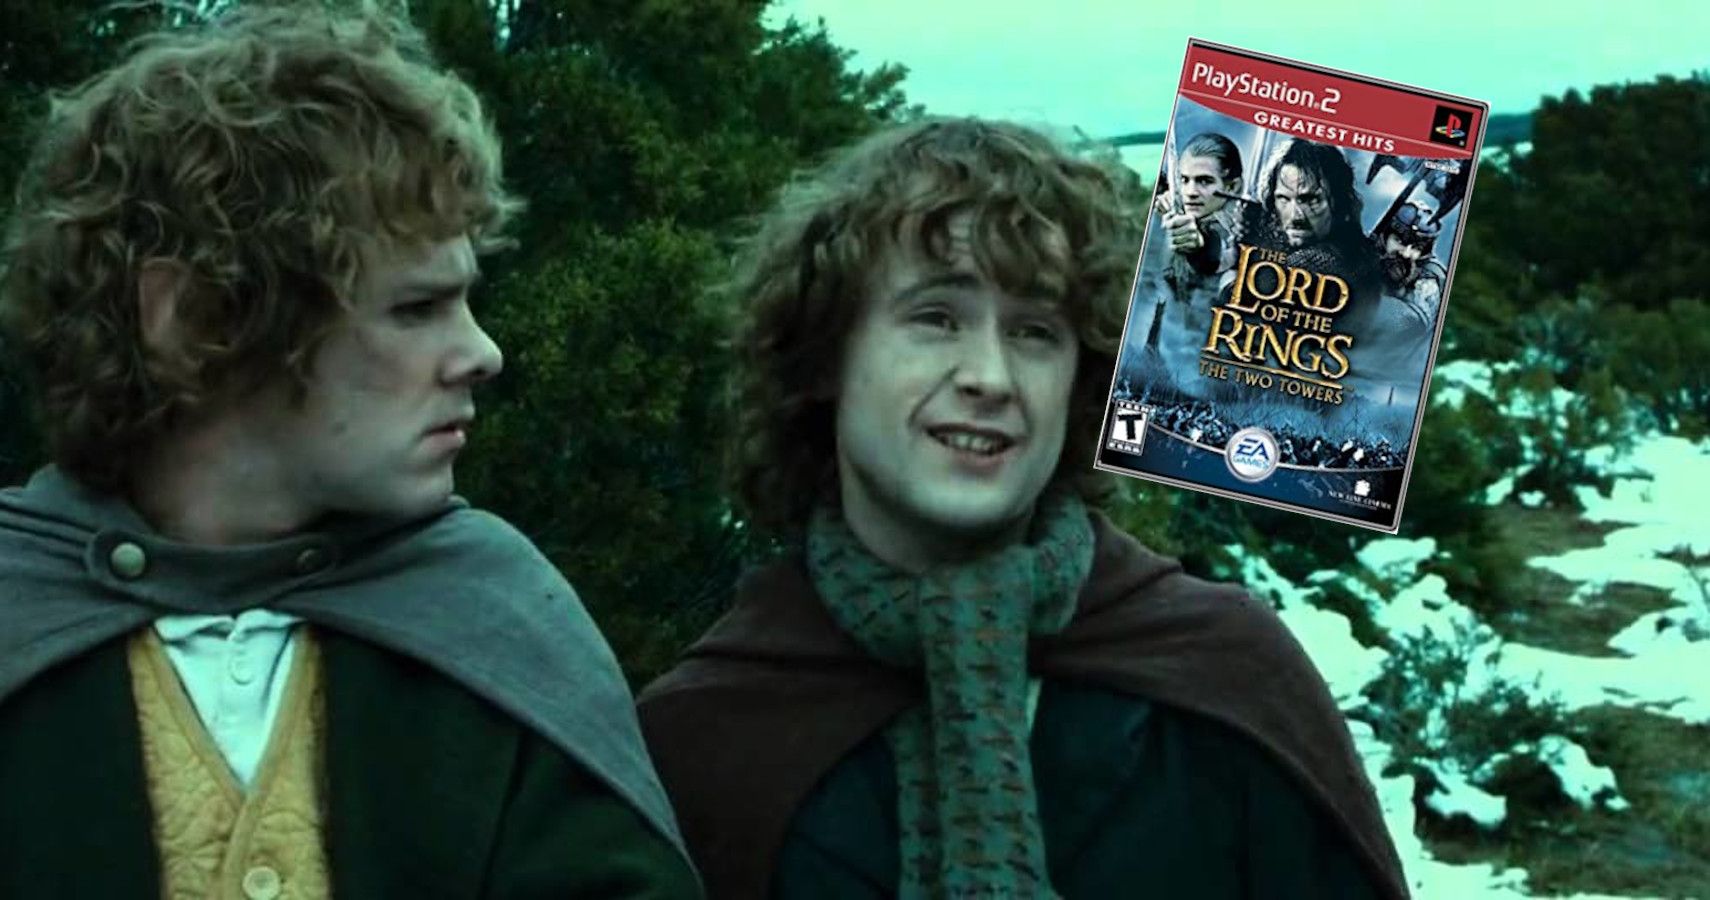 download The Lord of the Rings: The Two Towers